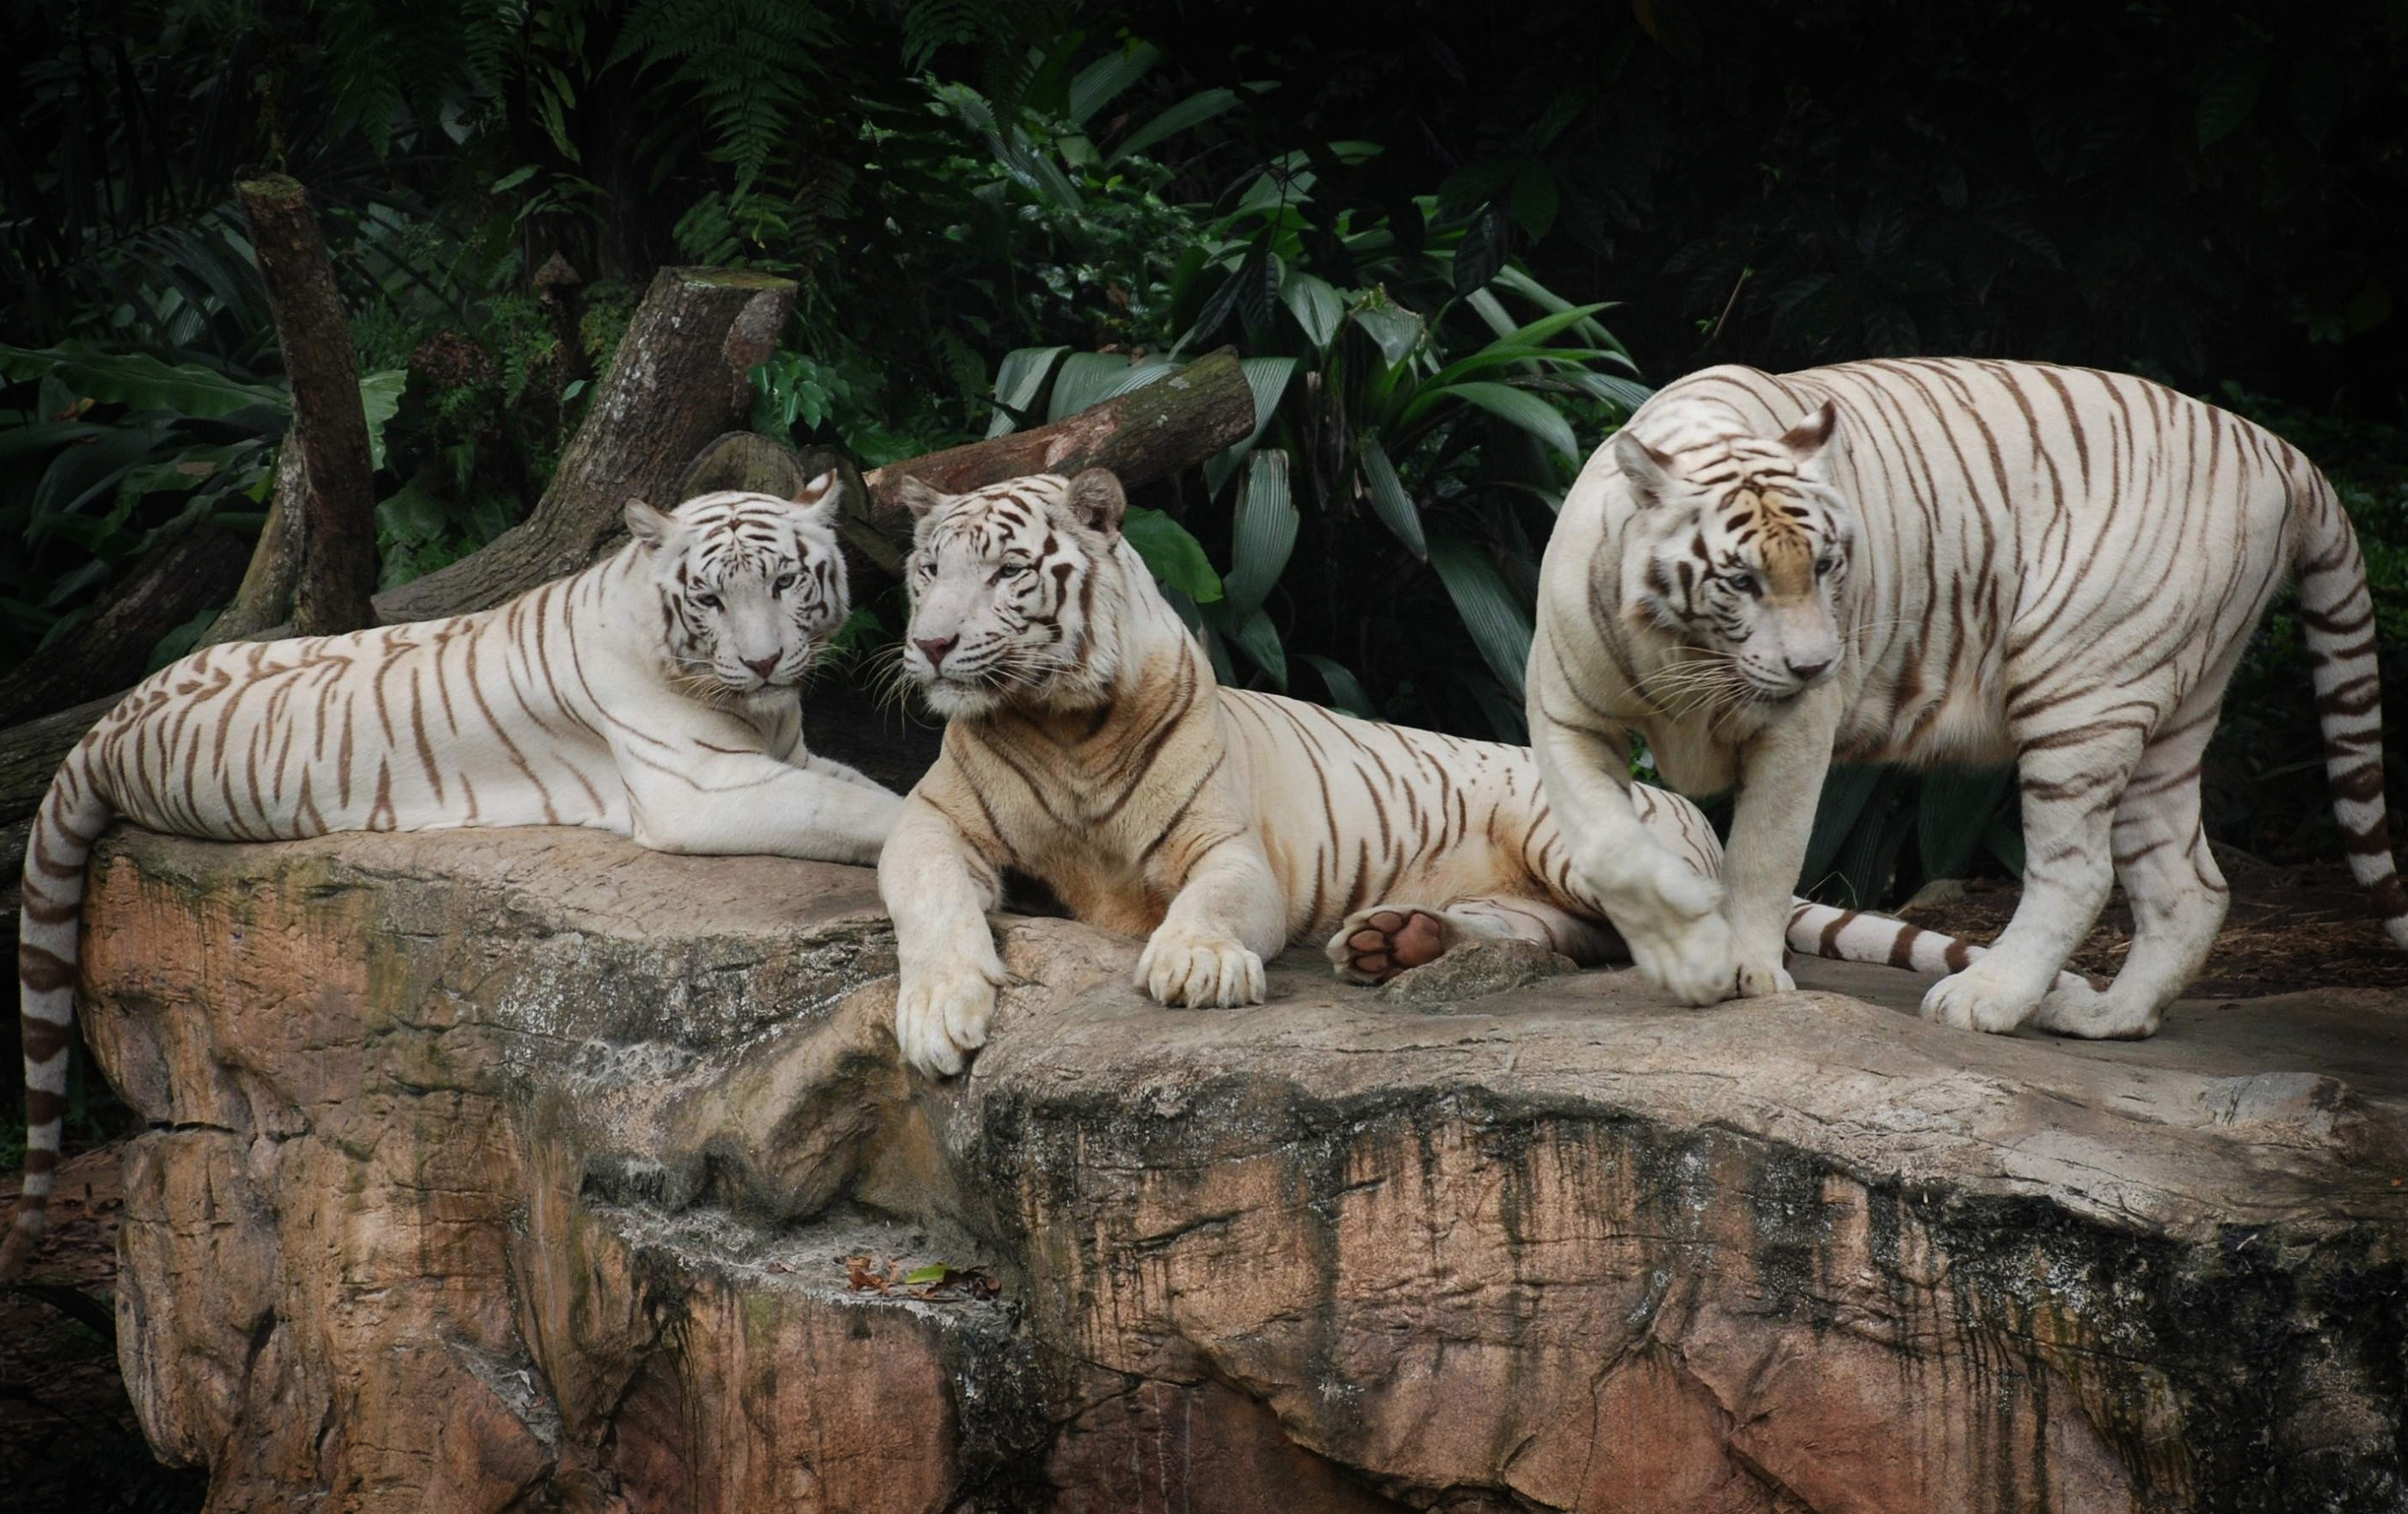 194 White Tiger HD Wallpapers | Backgrounds - Wallpaper Abyss